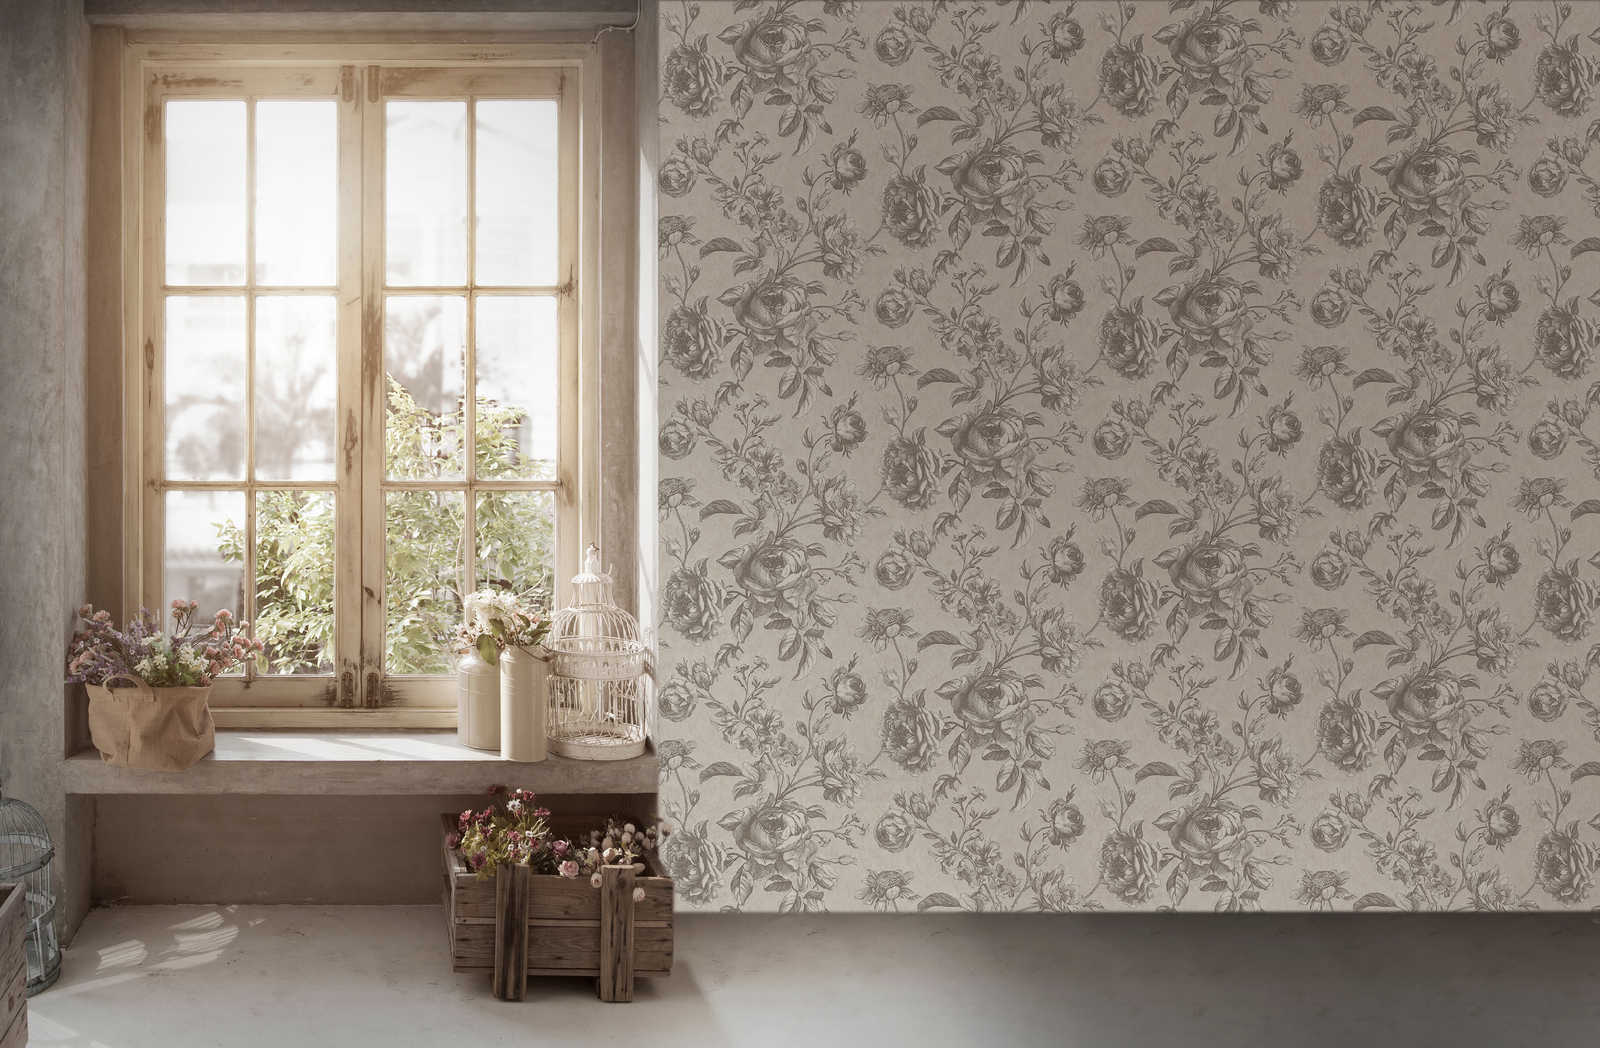             Wallpaper roses pattern in vintage sign style - grey, cream
        